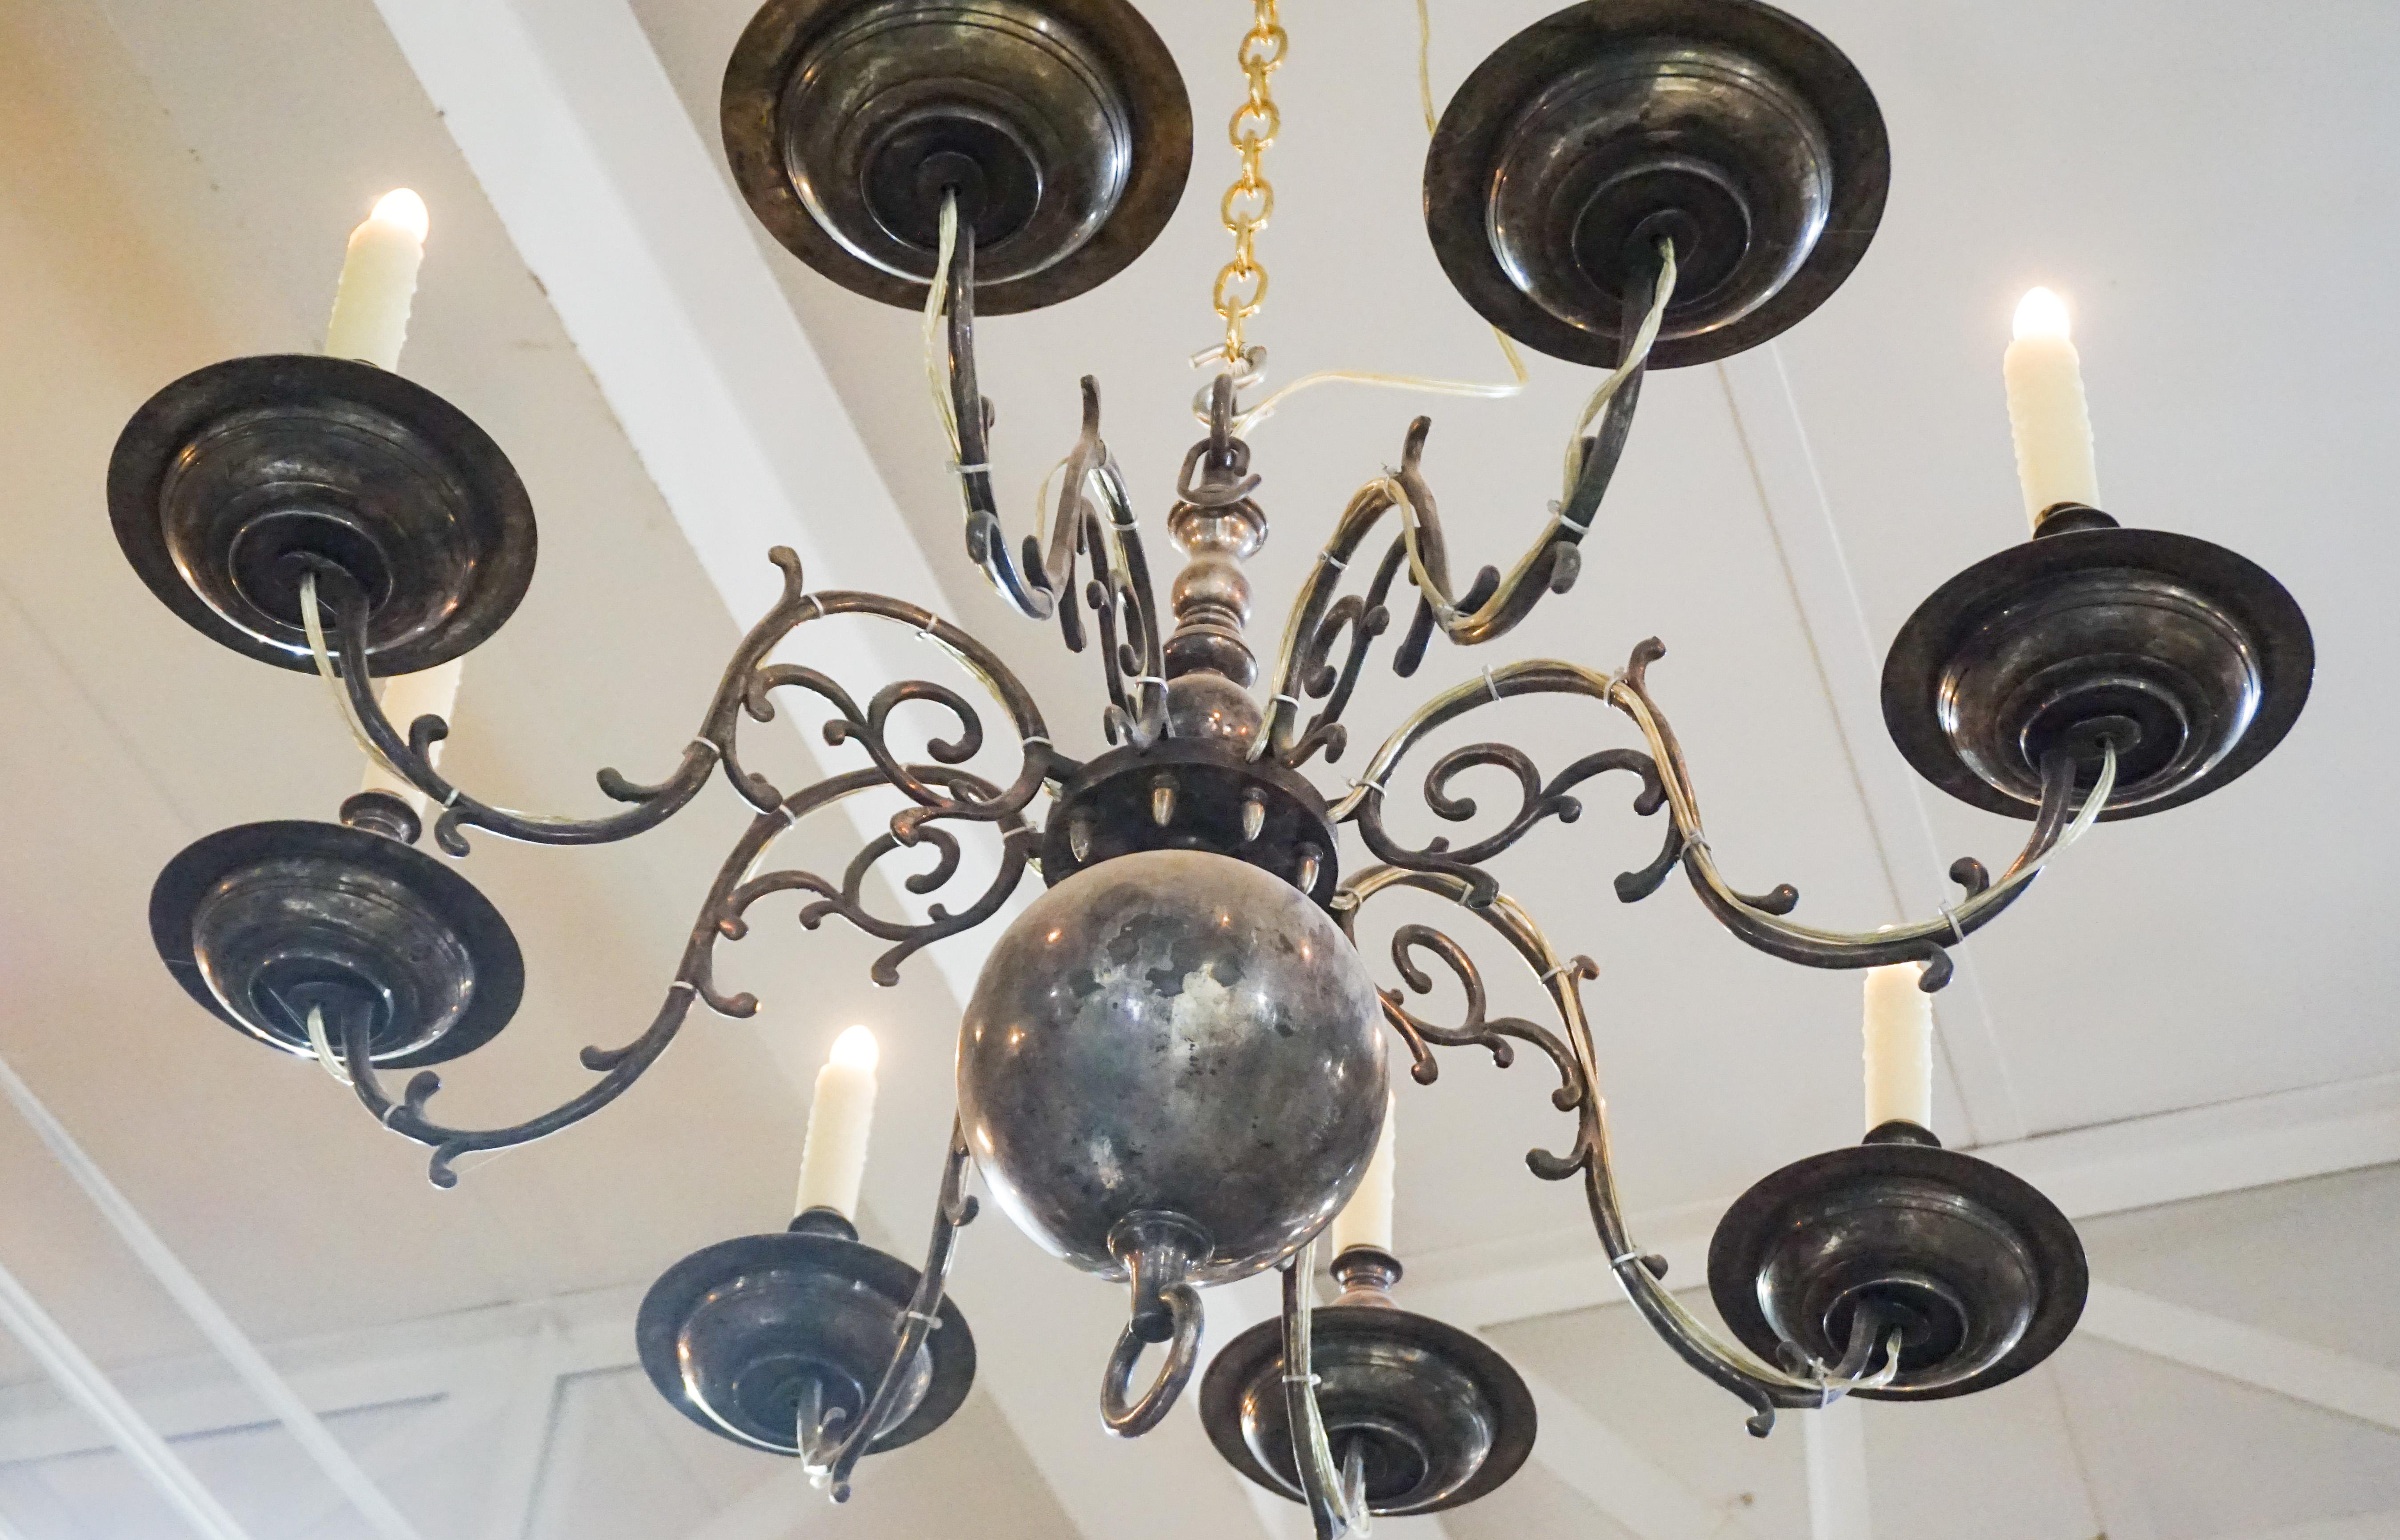 This antique chandelier is of Dutch origin and features eight lights. Ready for install.

Measurements: 37.5